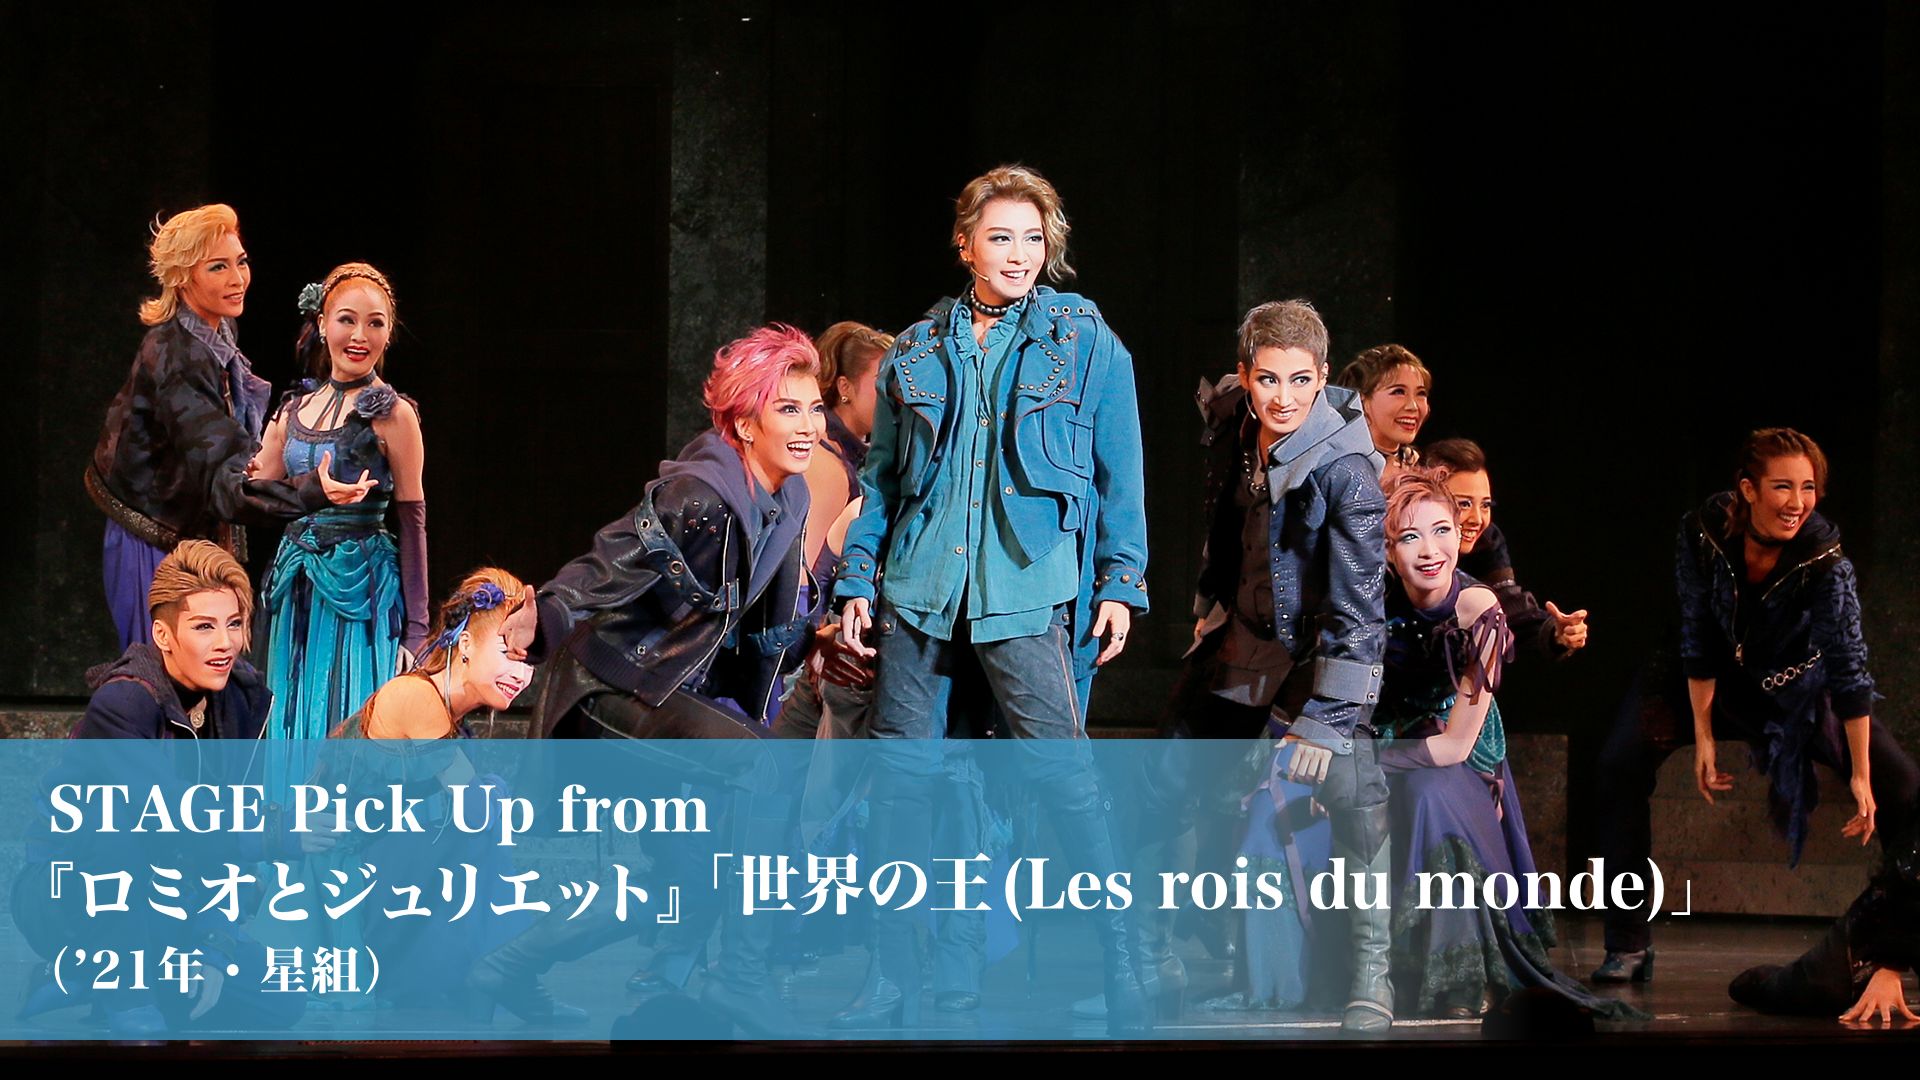 STAGE Pick Up from 『ロミオとジュリエット』「世界の王 (Les rois du monde)」(’21年・星組)